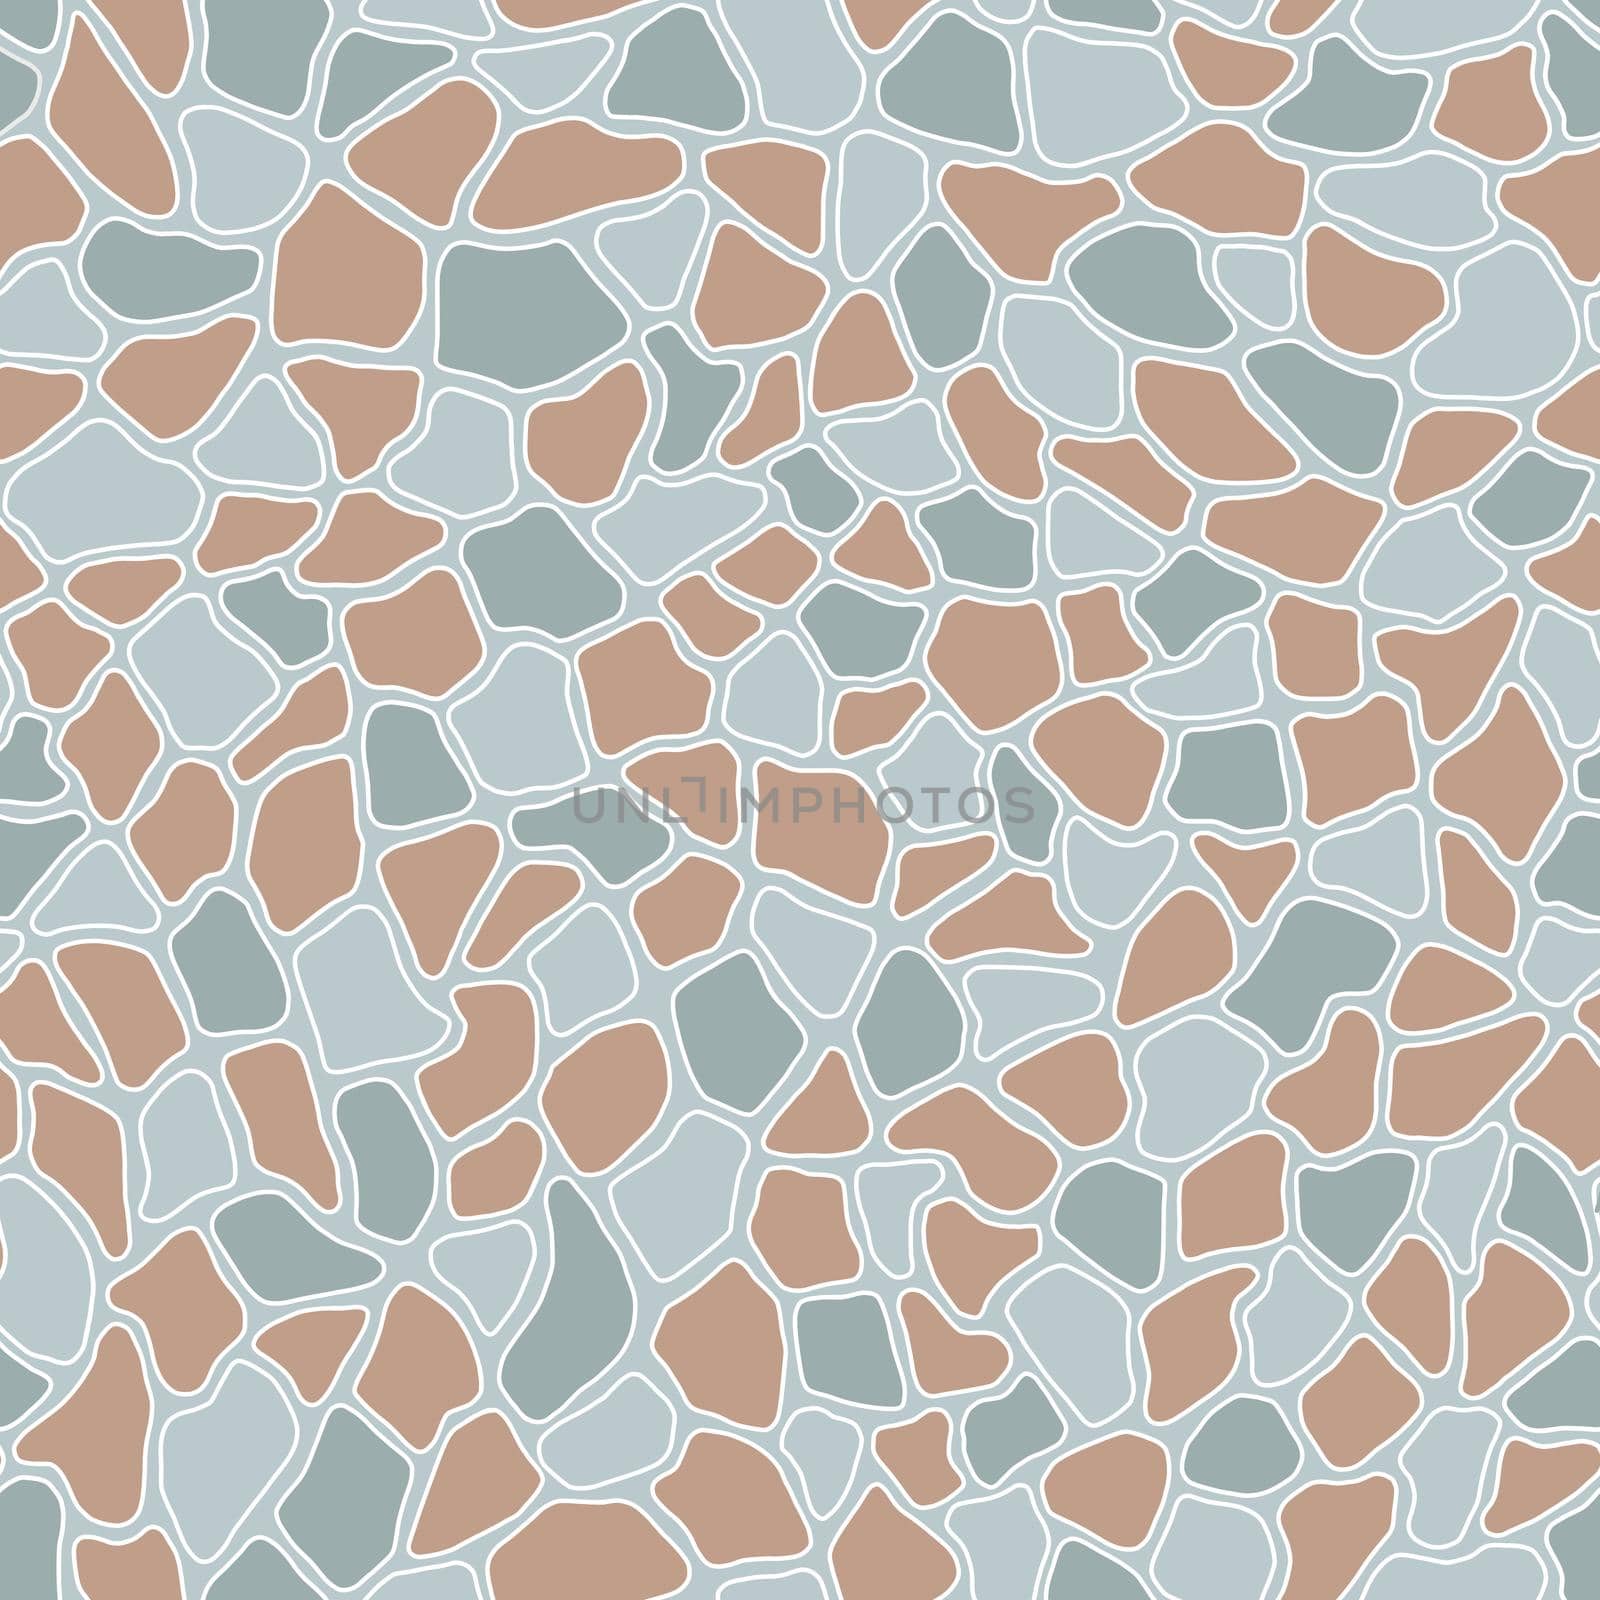 Terrazzo modern trendy colorful seamless pattern.Abstract creative backdrop with chaotic small pieces irregular shapes. Ideal for wrapping paper,textile,print,wallpaper,terrazzo flooring.Azure, beige by Angelsmoon